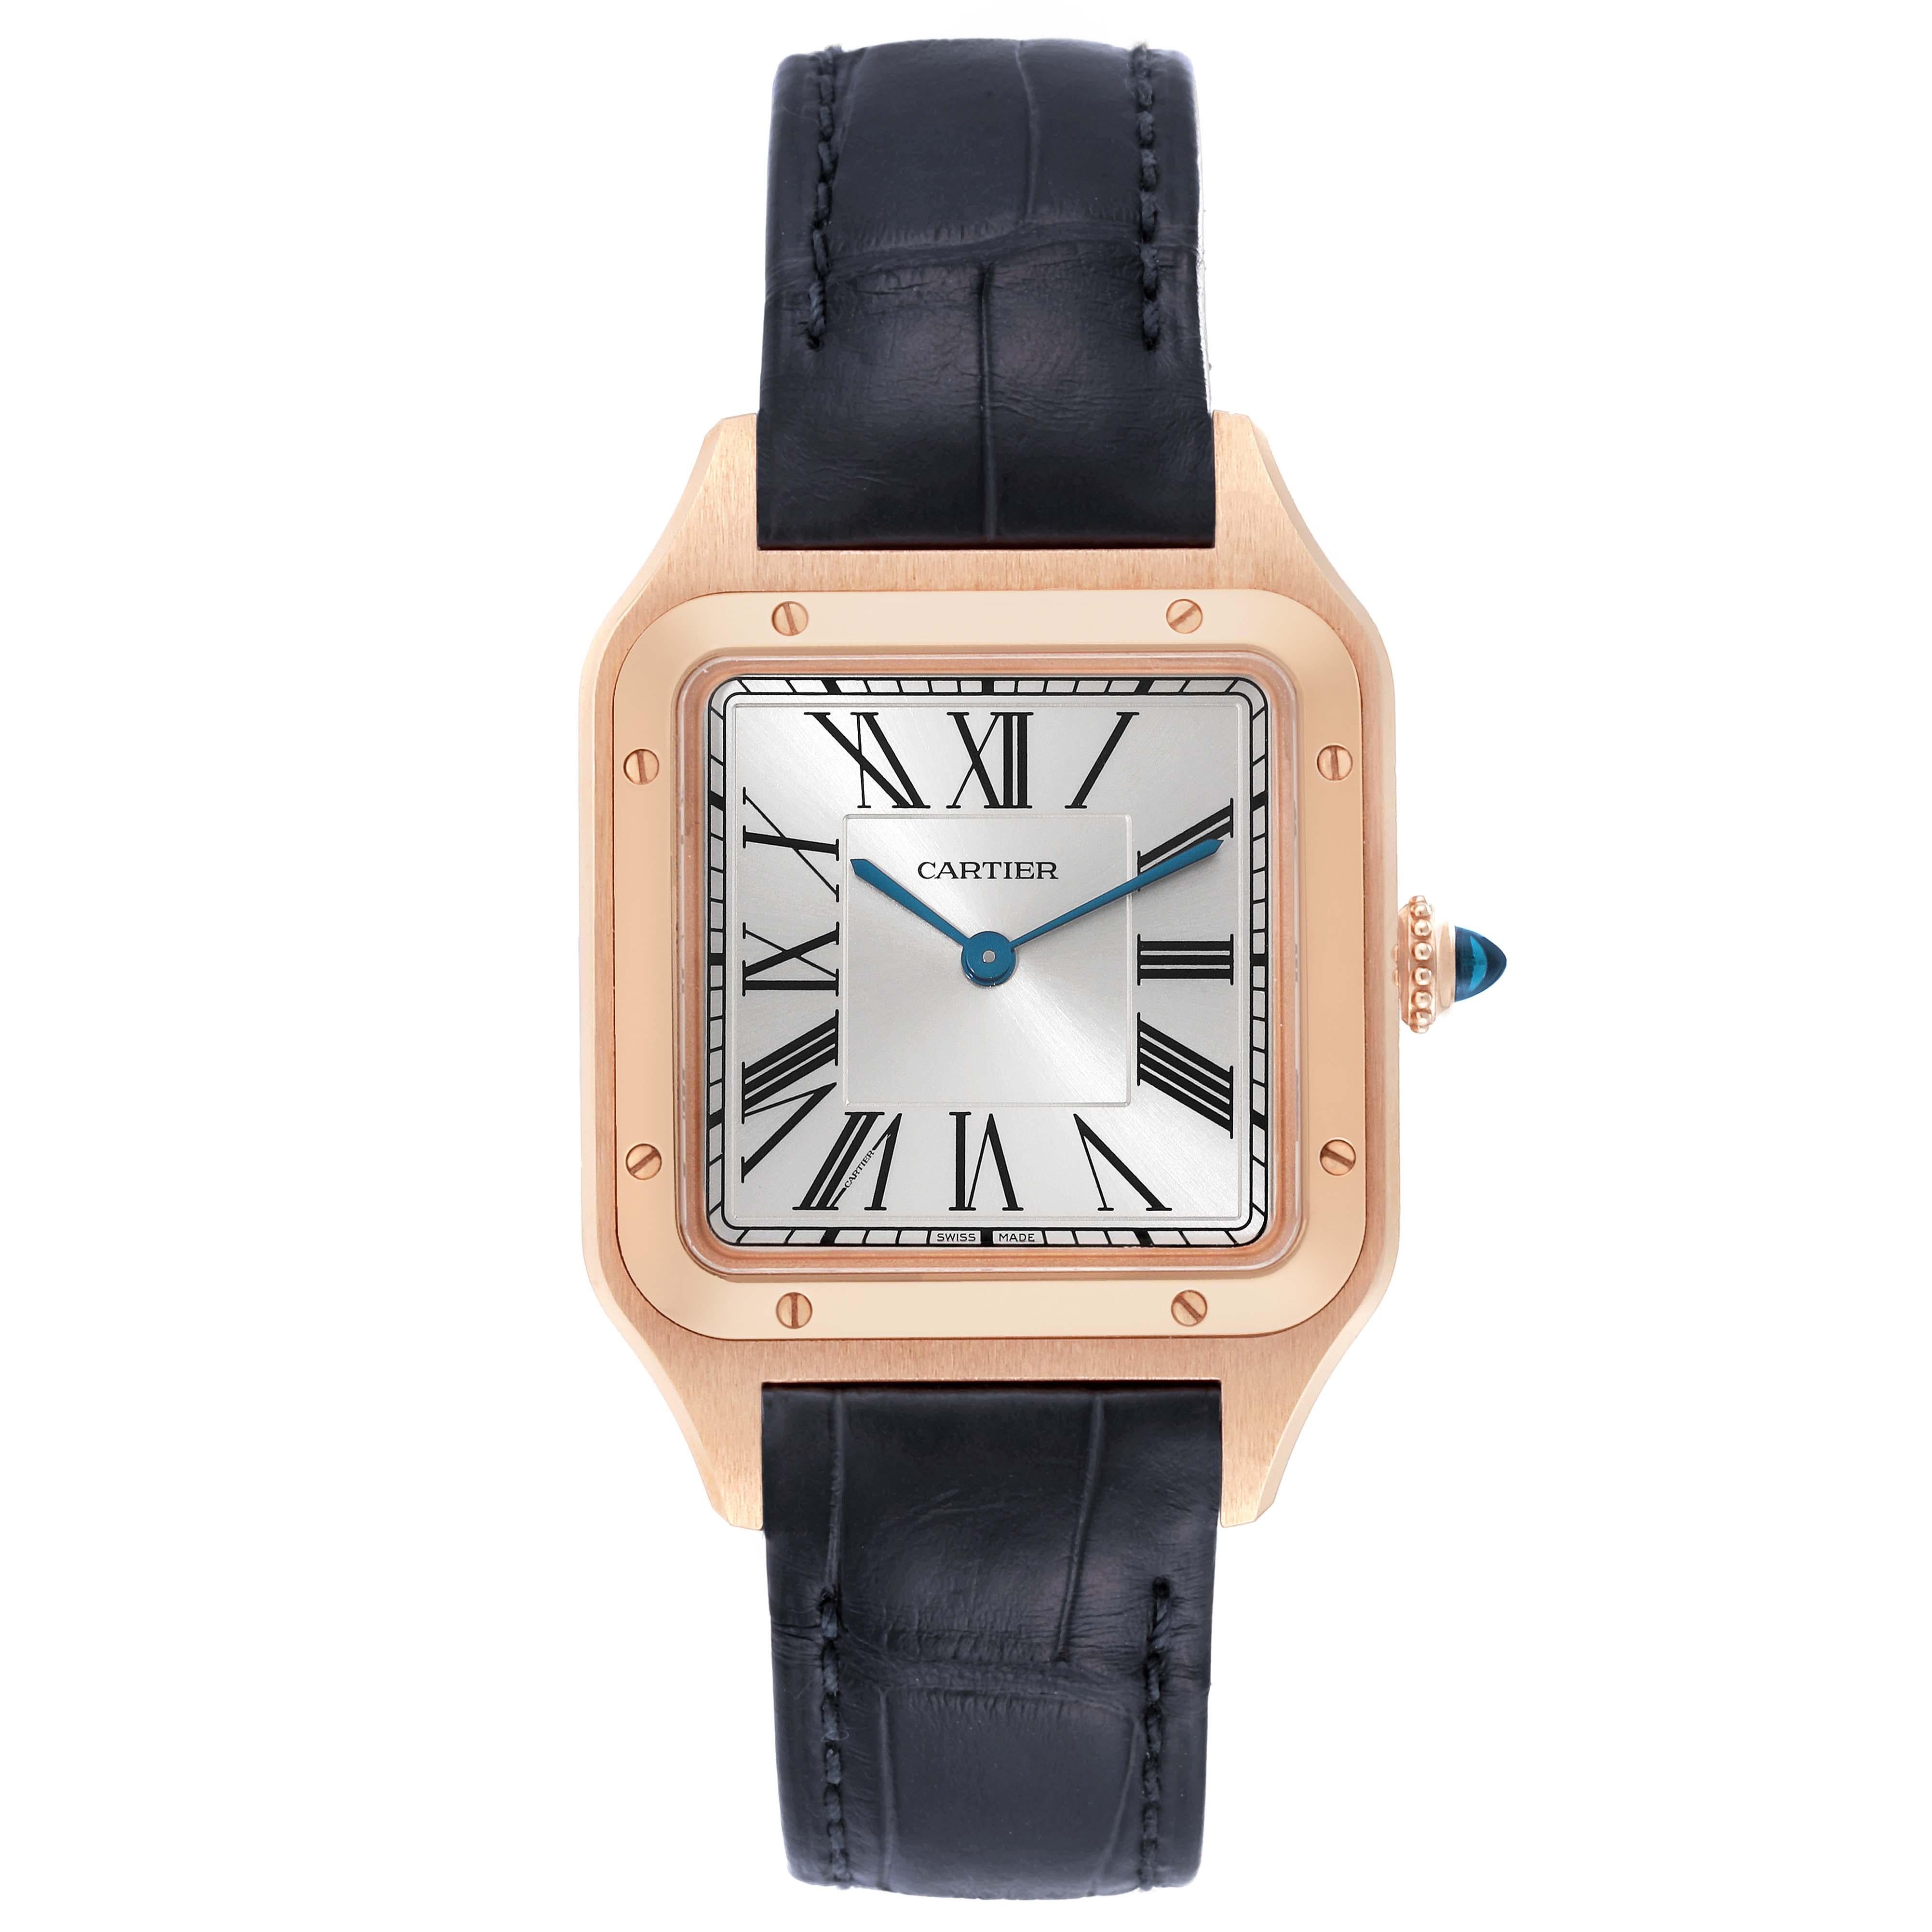 Cartier Santos Dumont Large Rose Gold Silver Dial Mens Watch WGSA0021 Box Card. Quartz movement. 18k rose gold case 43.5 mm x 31.4 mm. Case thickness 7.3 mm. Circular grained crown set with blue sapphire cabochon. 18k rose gold bezel punctuated with